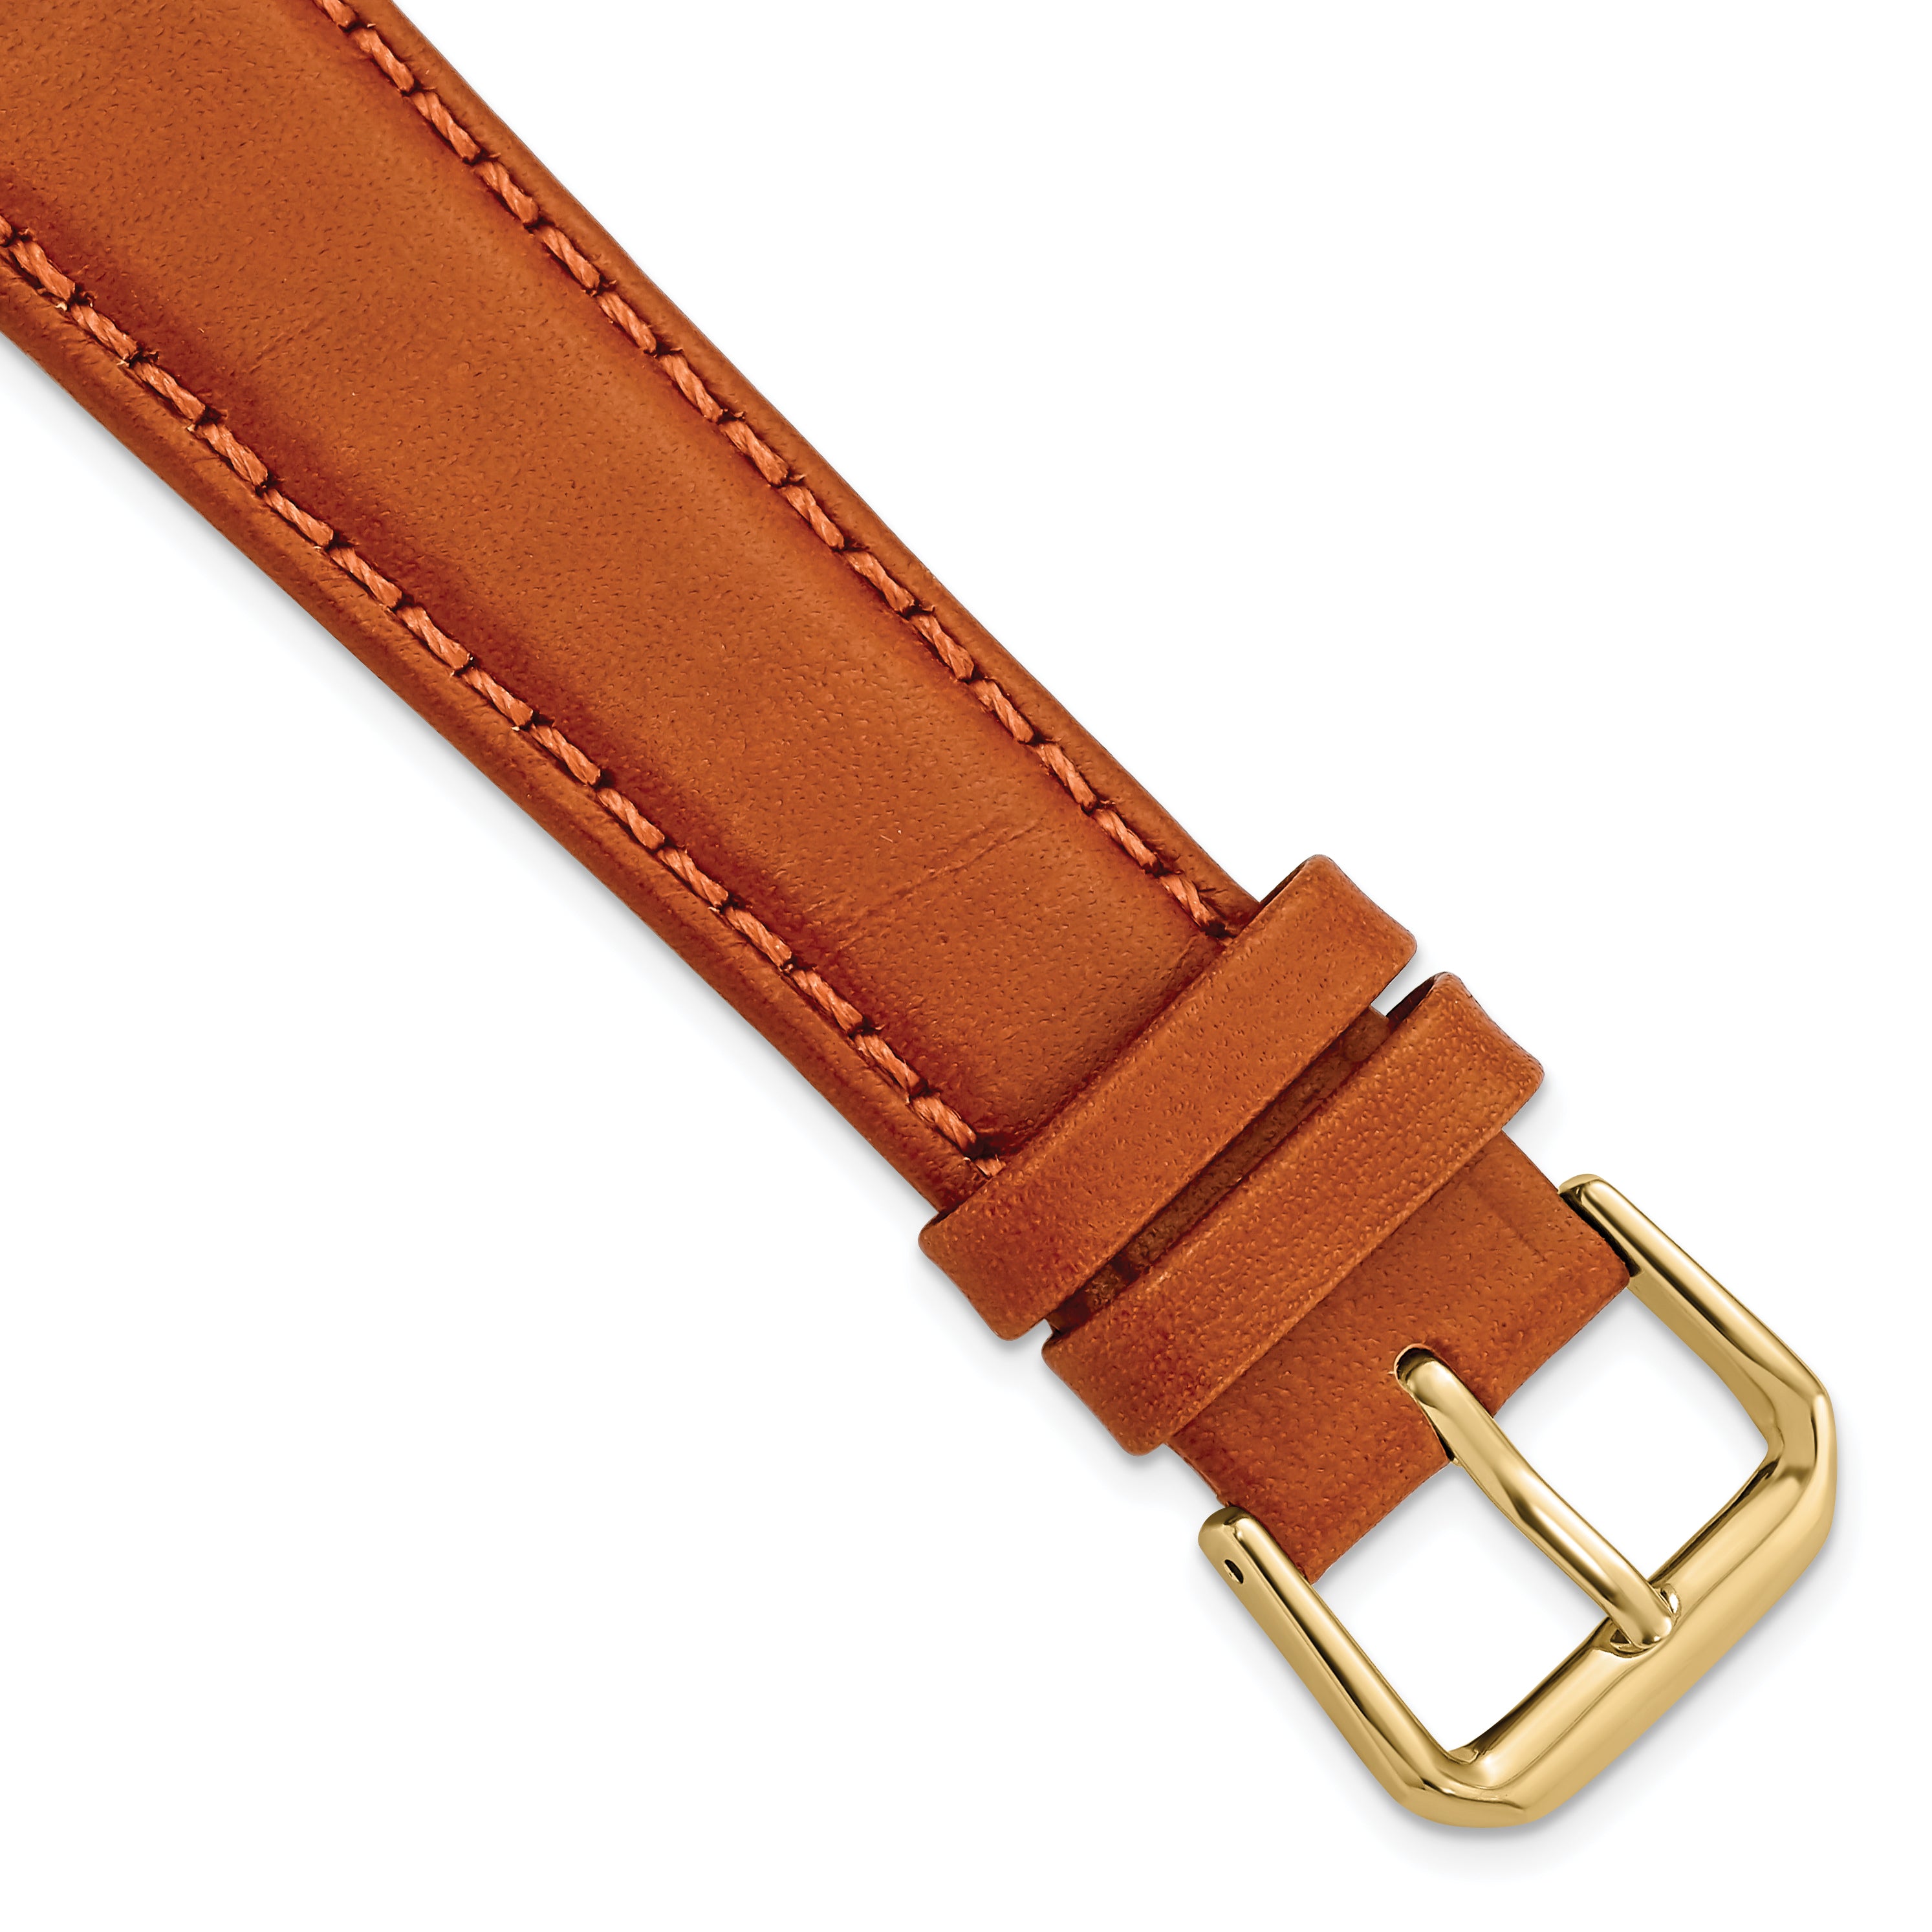 DeBeer 19mm Havana Italian Leather with Gold-tone Buckle 7.5 inch Watch Band